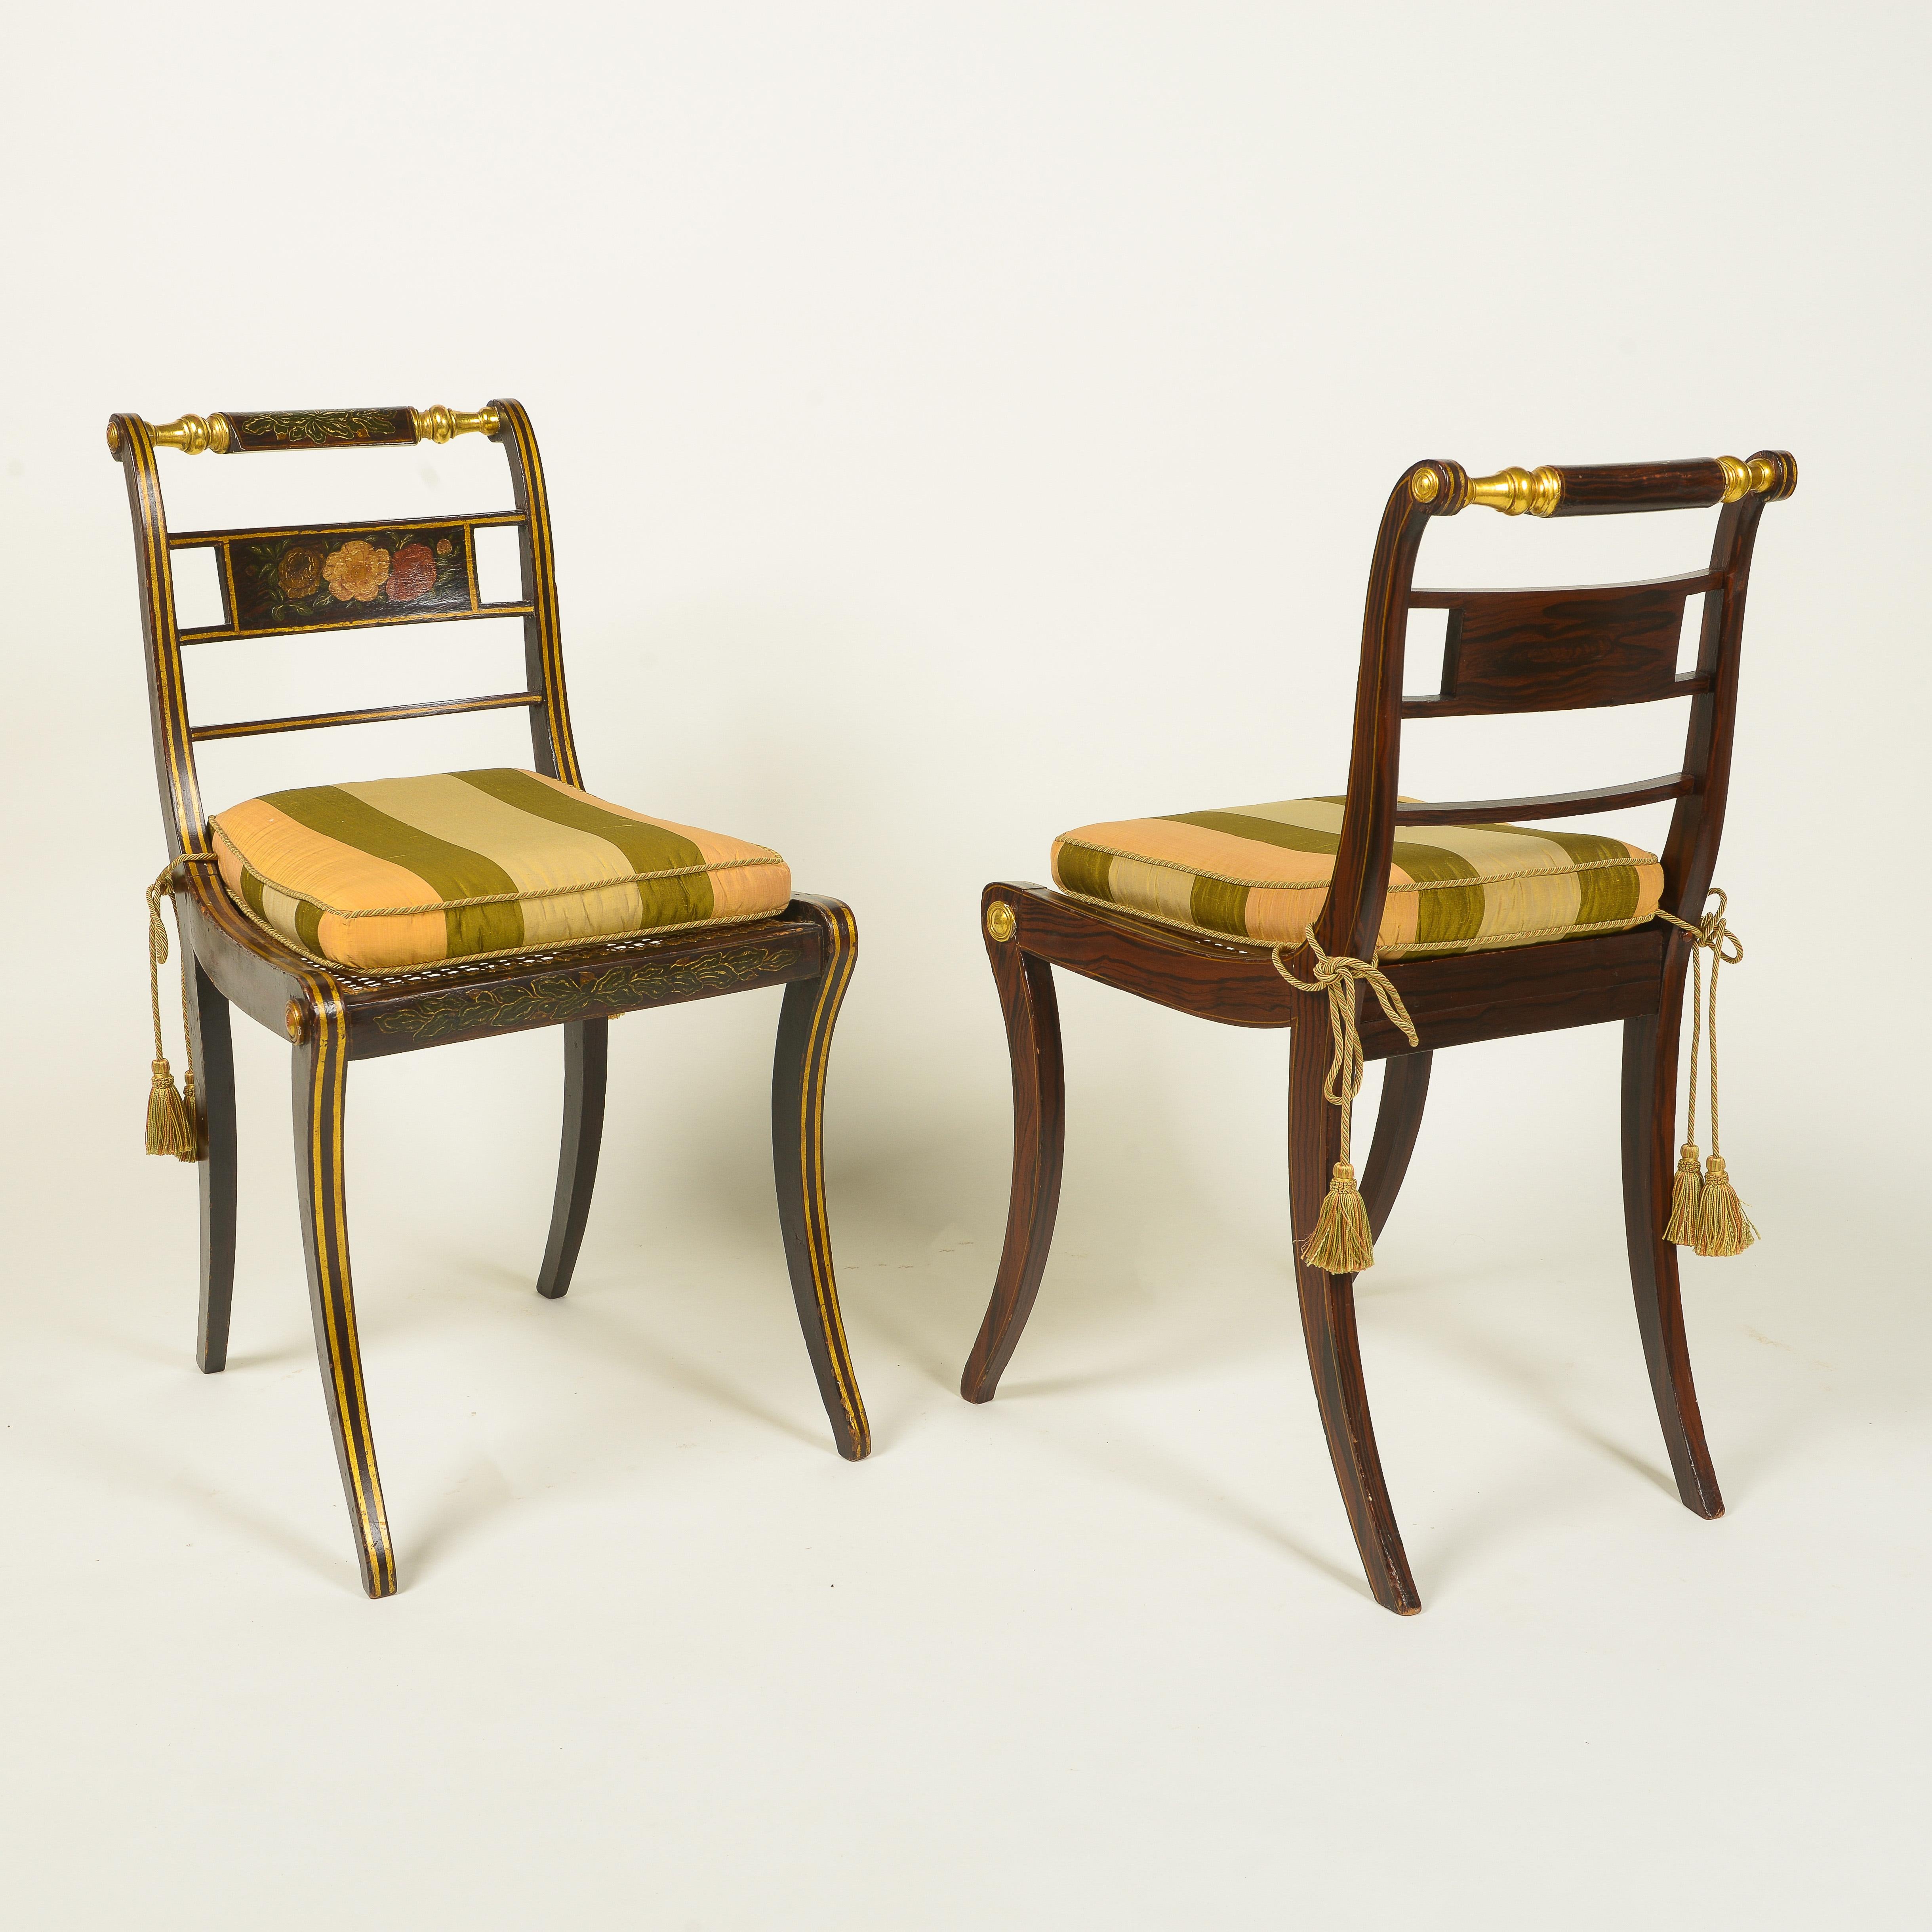 Each back centered by a horizontal splat decorated with different floral specimens; the caned seat striped silk squab cushion in green and pale peach over a foliate-decorated seat rail; on saber legs; with gilt banding throughout.